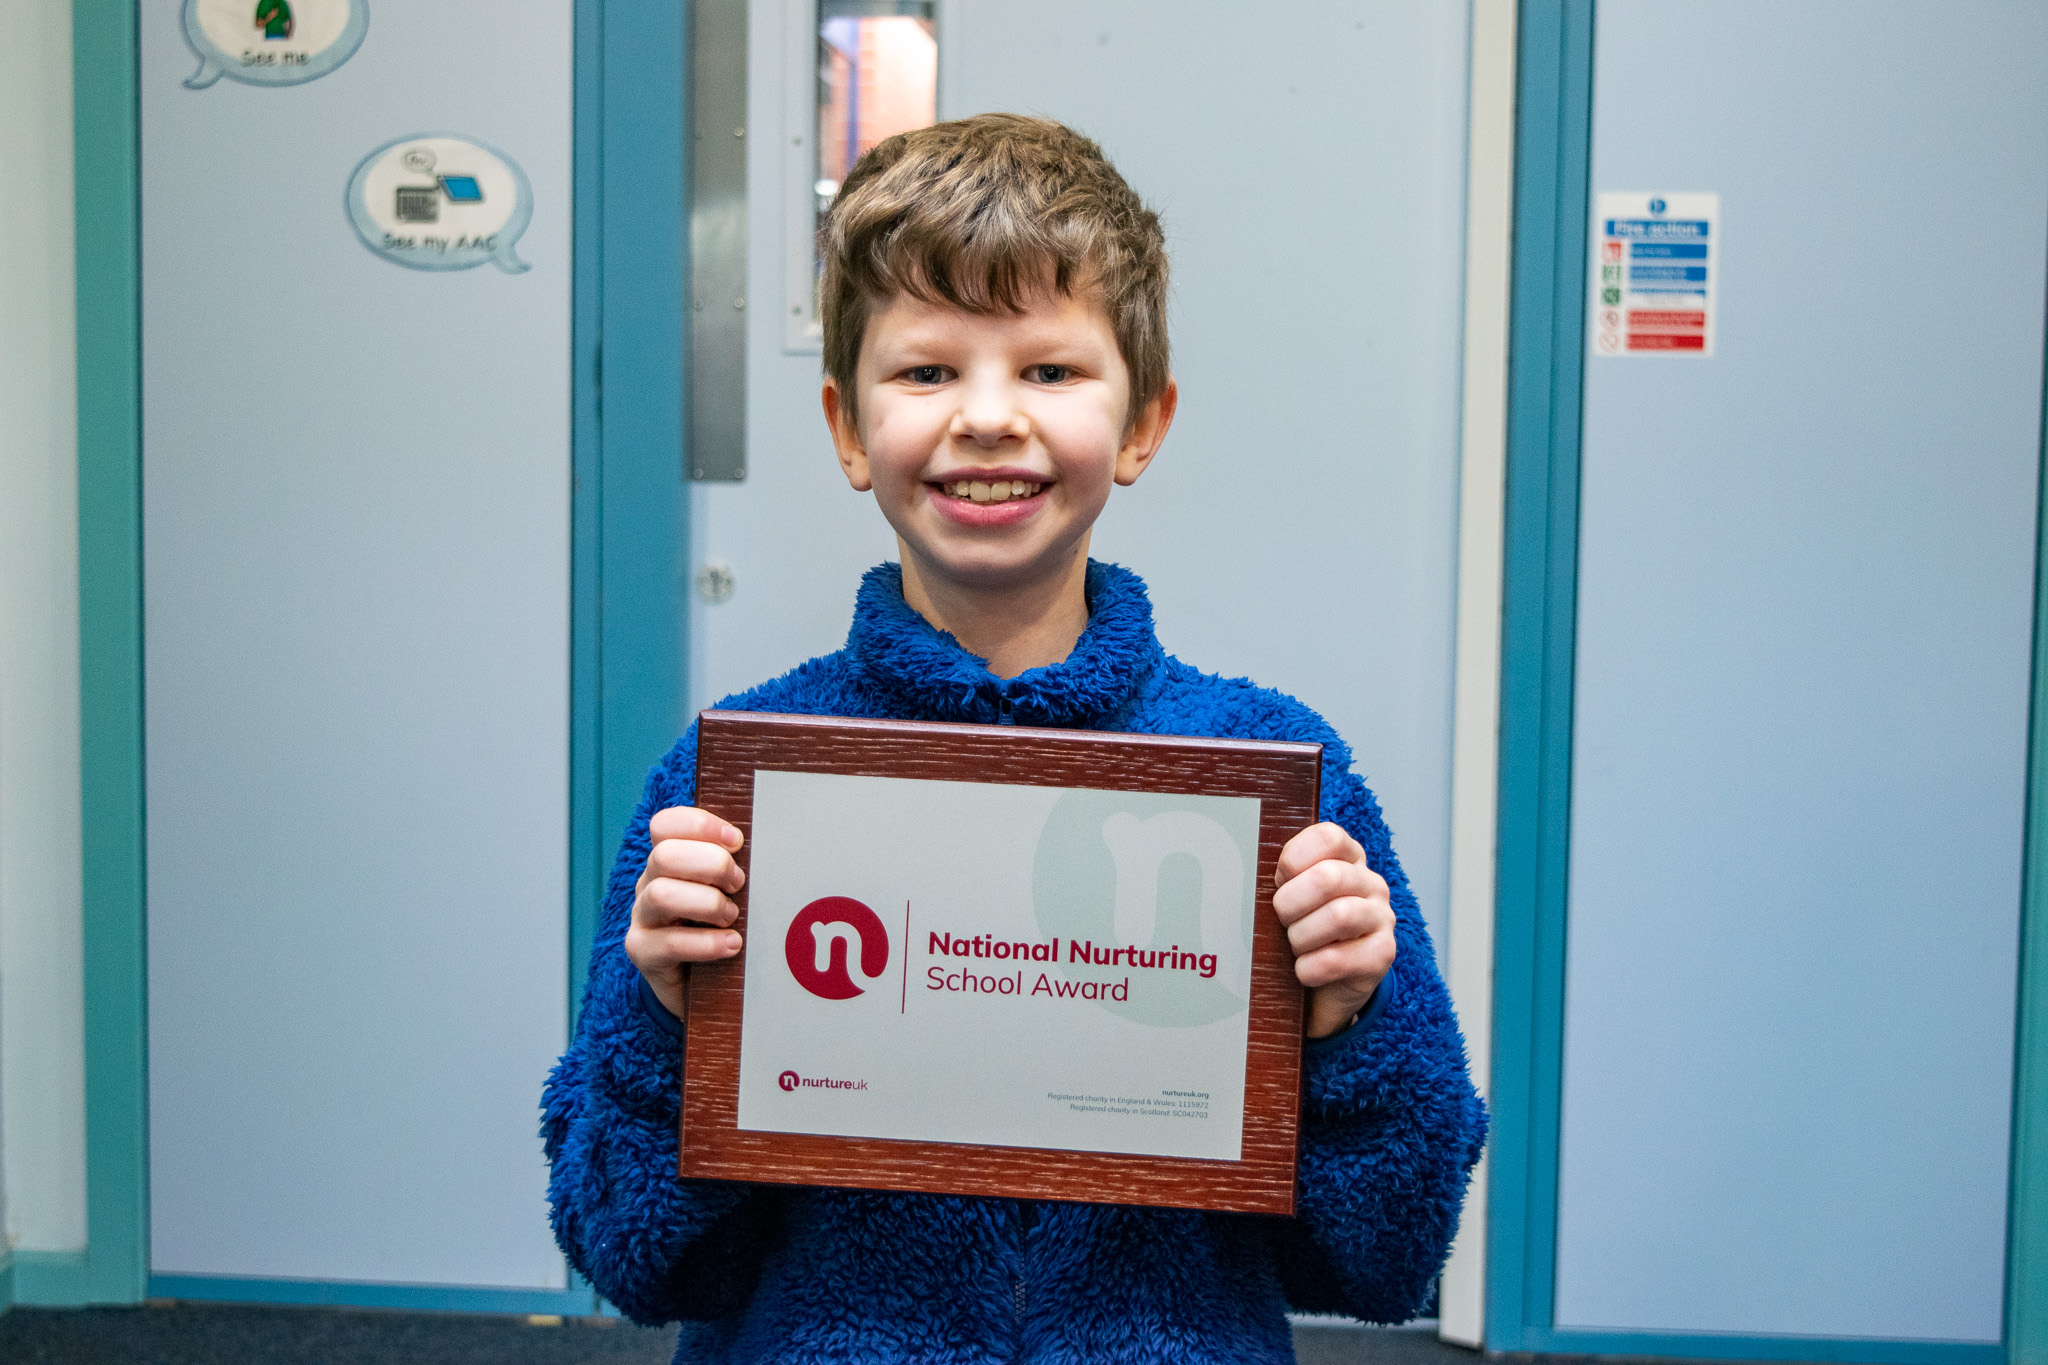 A pupil holding the certificate and smiling for a photo